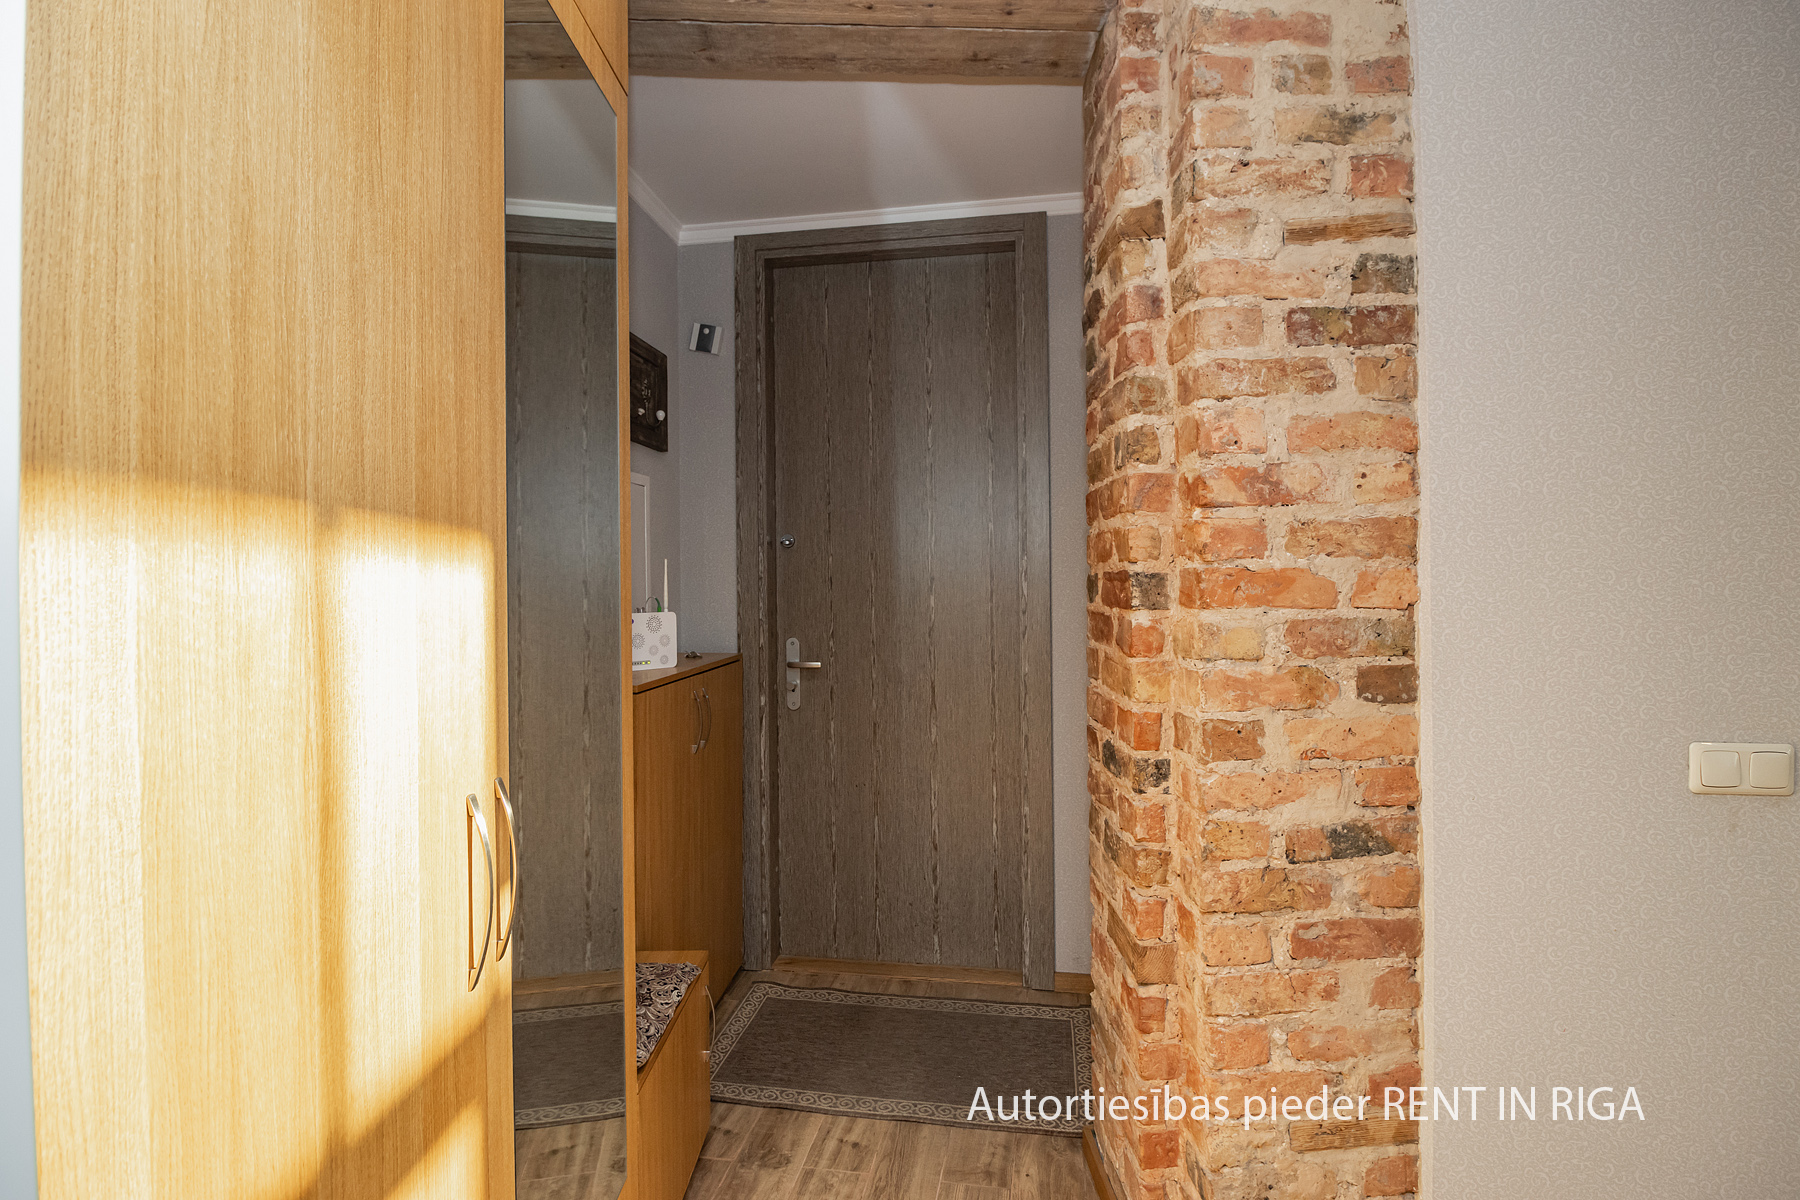 Apartment for rent, Alīses street 5 - Image 1